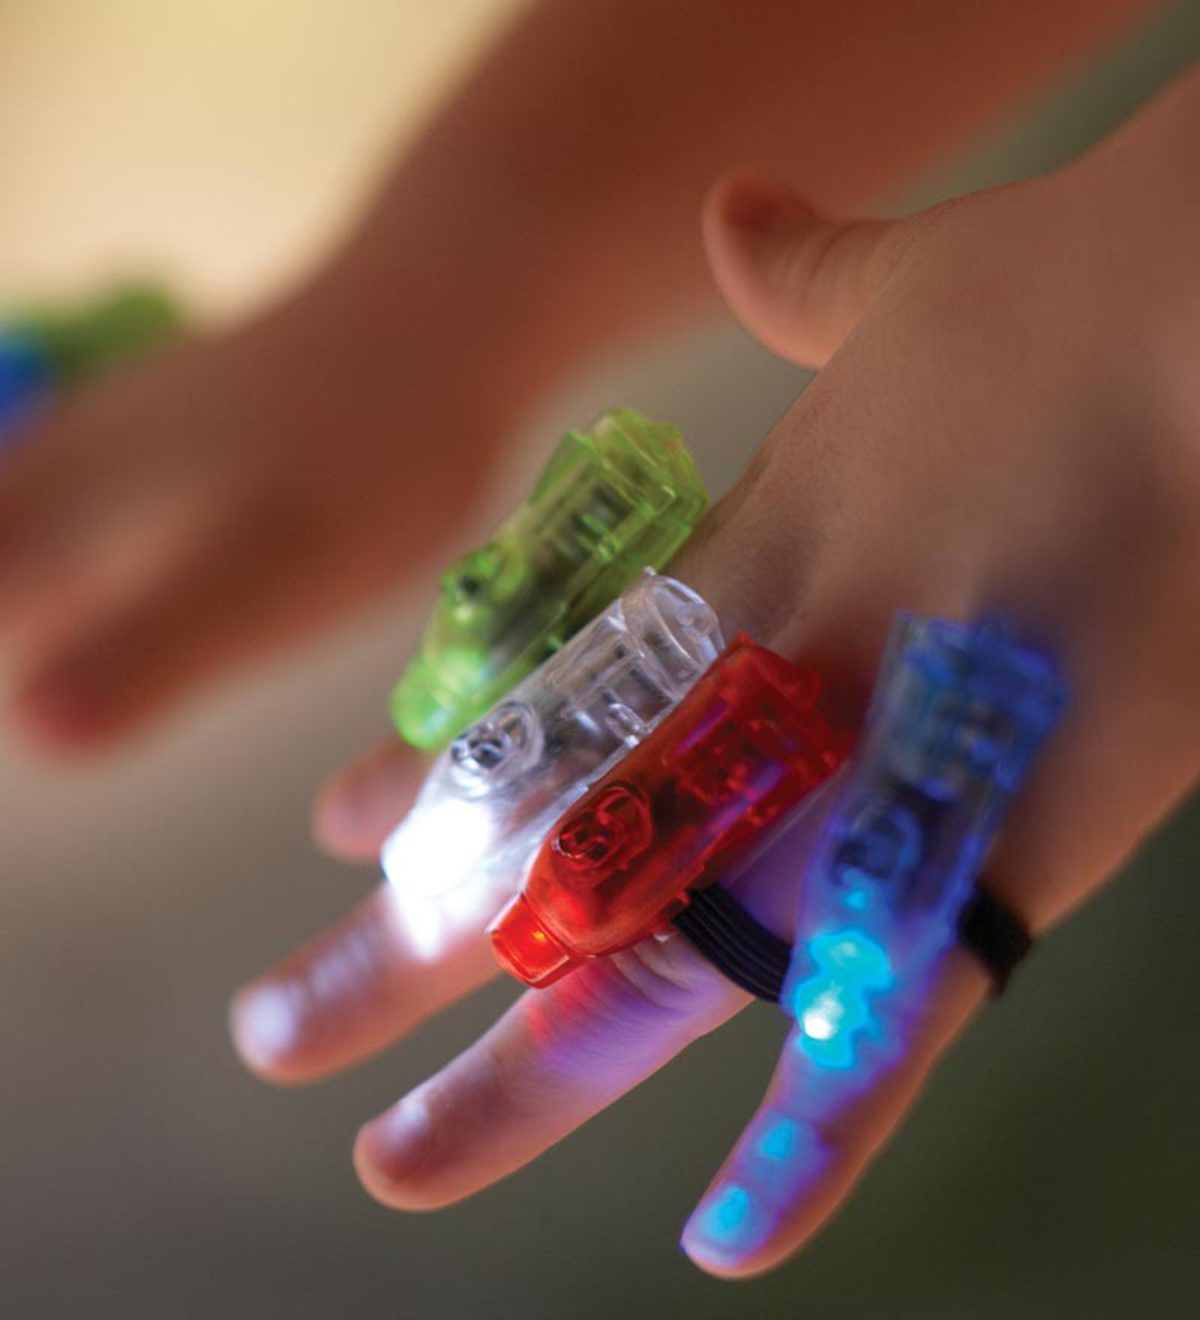 Finger torches pack of 4, The bright LED Finger Light torch is a must-have accessory for anyone who loves to bring a little sparkle and shine to their world. Simply attach it to any finger and watch as it illuminates and follows your every move. But why stop at just one? With the Finger Light torch set, you can attach all four LED lights to create a mesmerizing multi-colored light show. Whether you're hosting a party, creating a sensory experience, or simply having fun in a darkened area, these torches are 